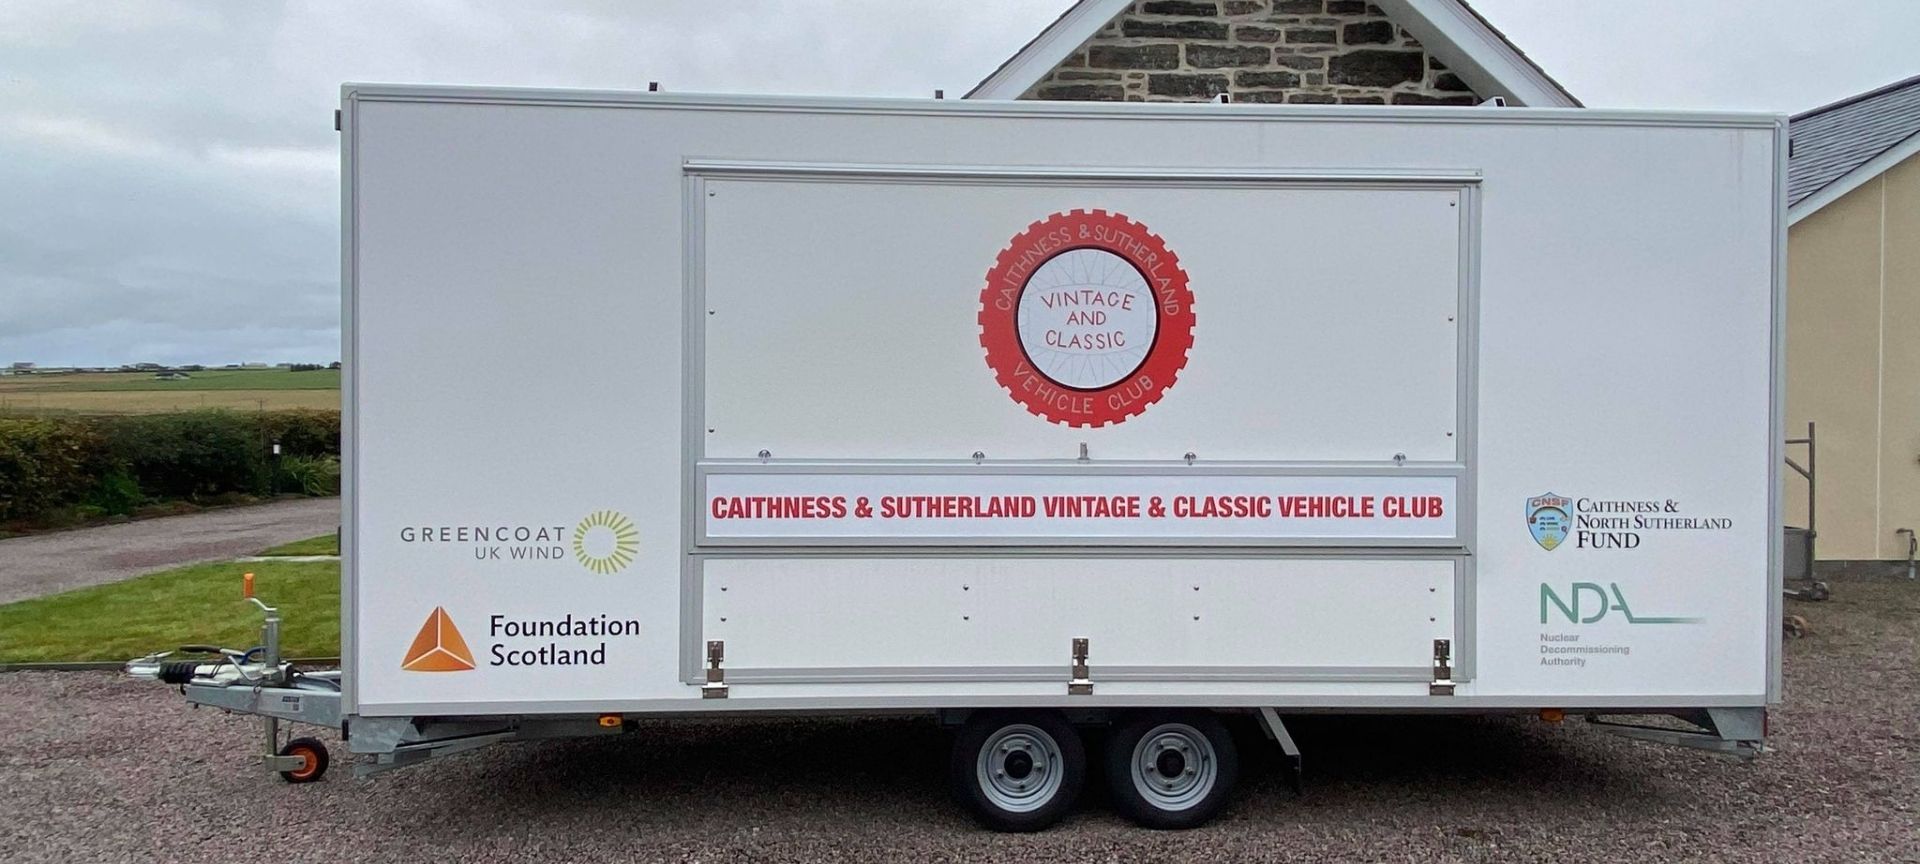 Caithness and Sutherland Vintage and Classic Vehicle Club Purchases a New Trailer